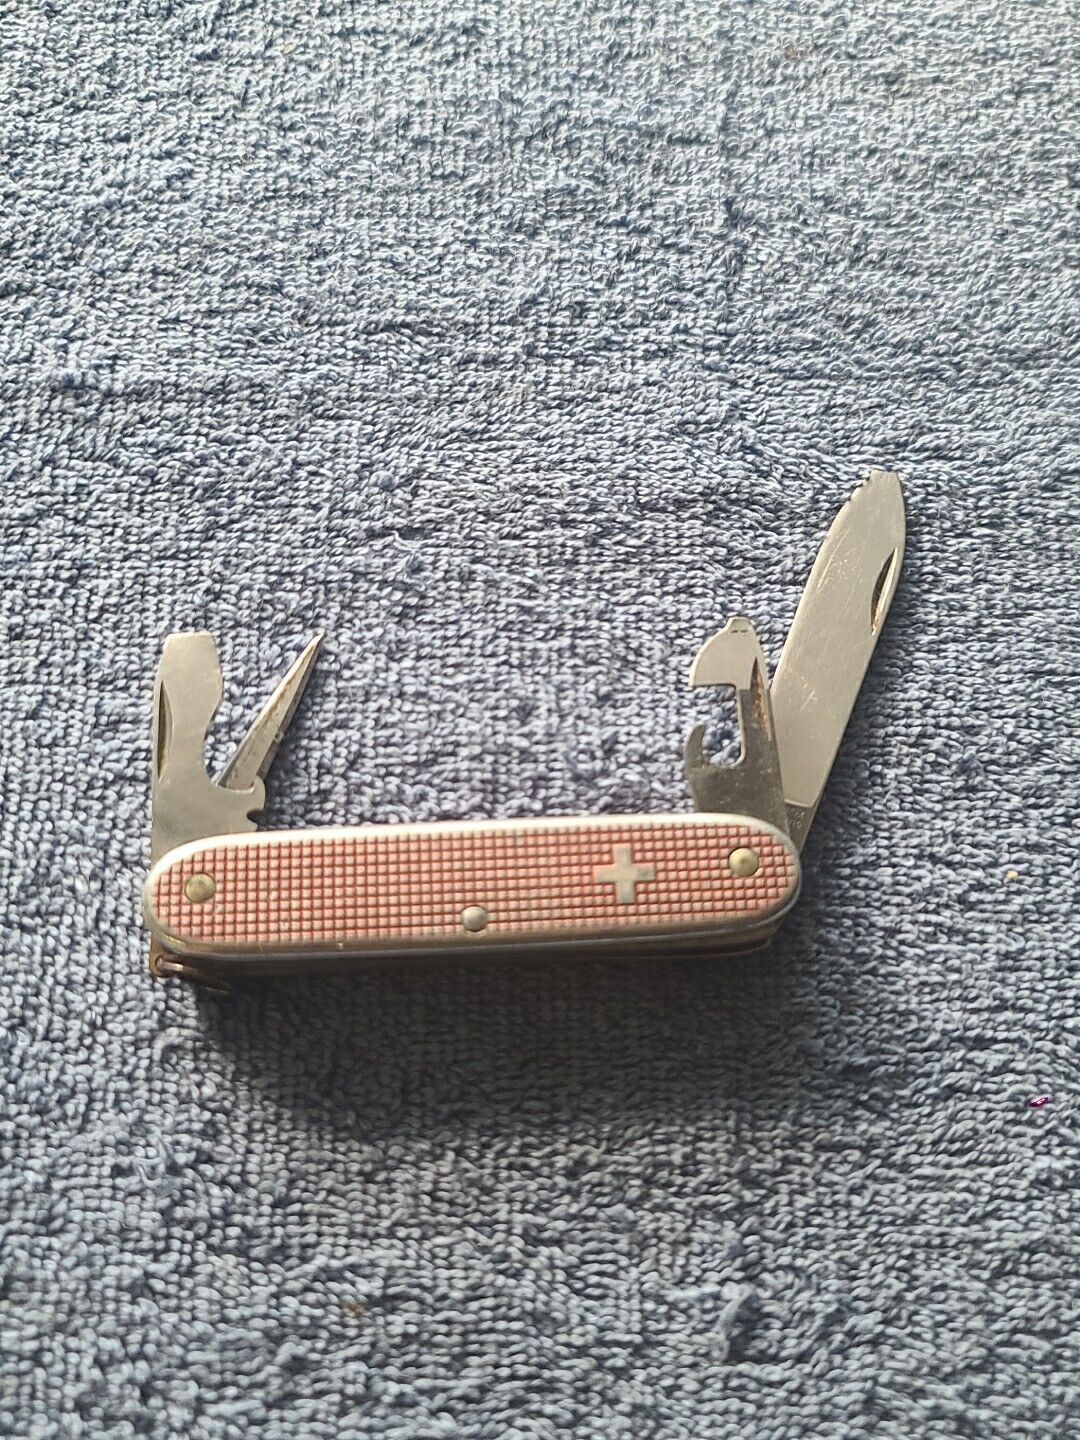 Vintage Victorinox Pioneer Red Alox Old Cross Swiss Army Knife - Collectable 